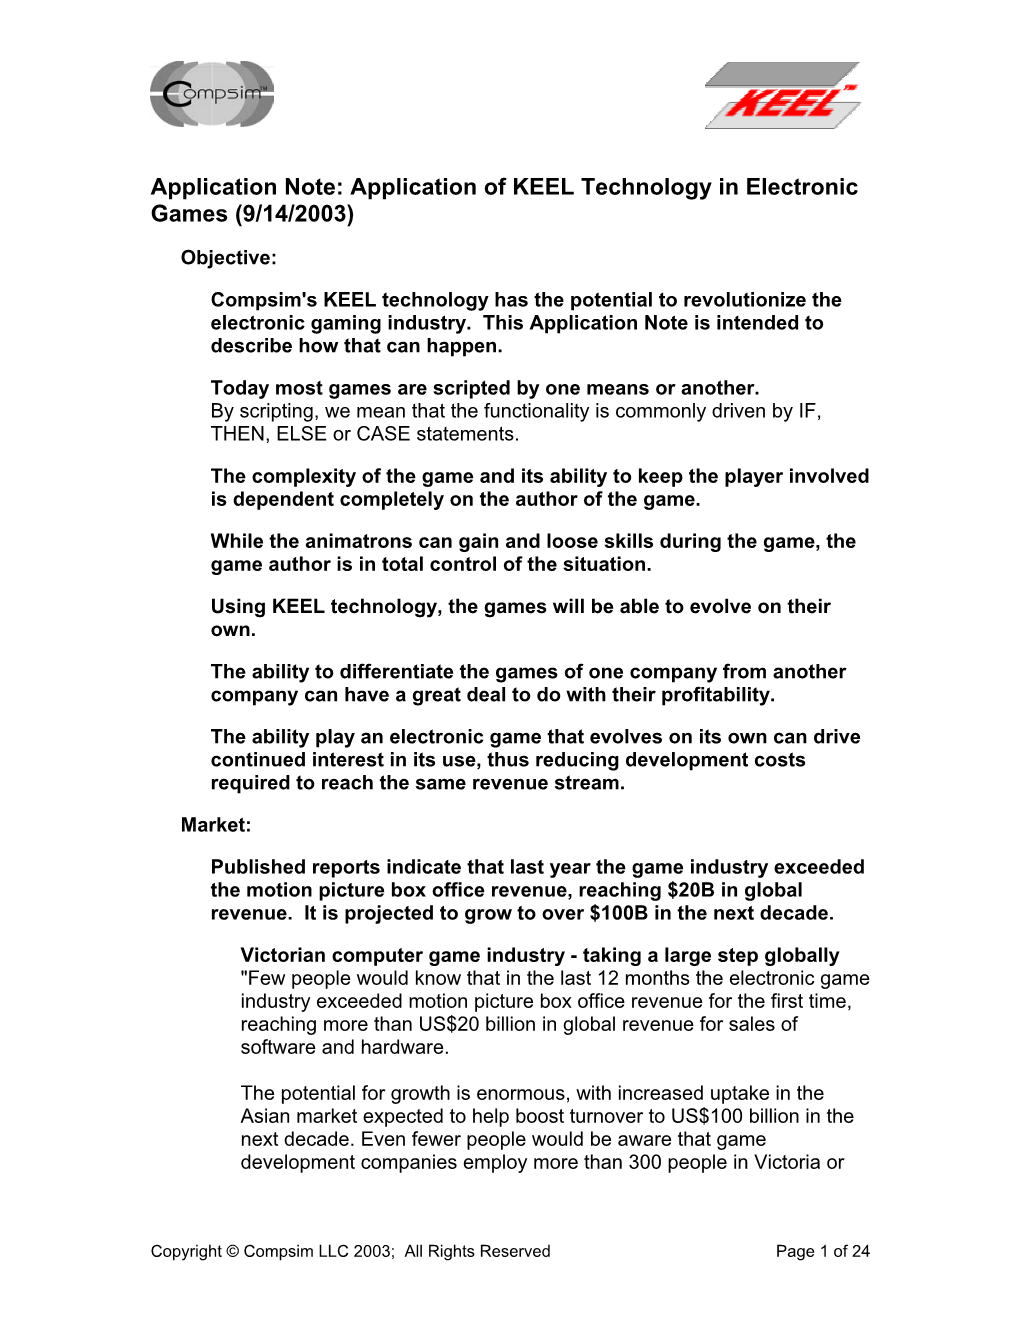 Application of KEEL Technology in Electronic Games (9/14/2003)